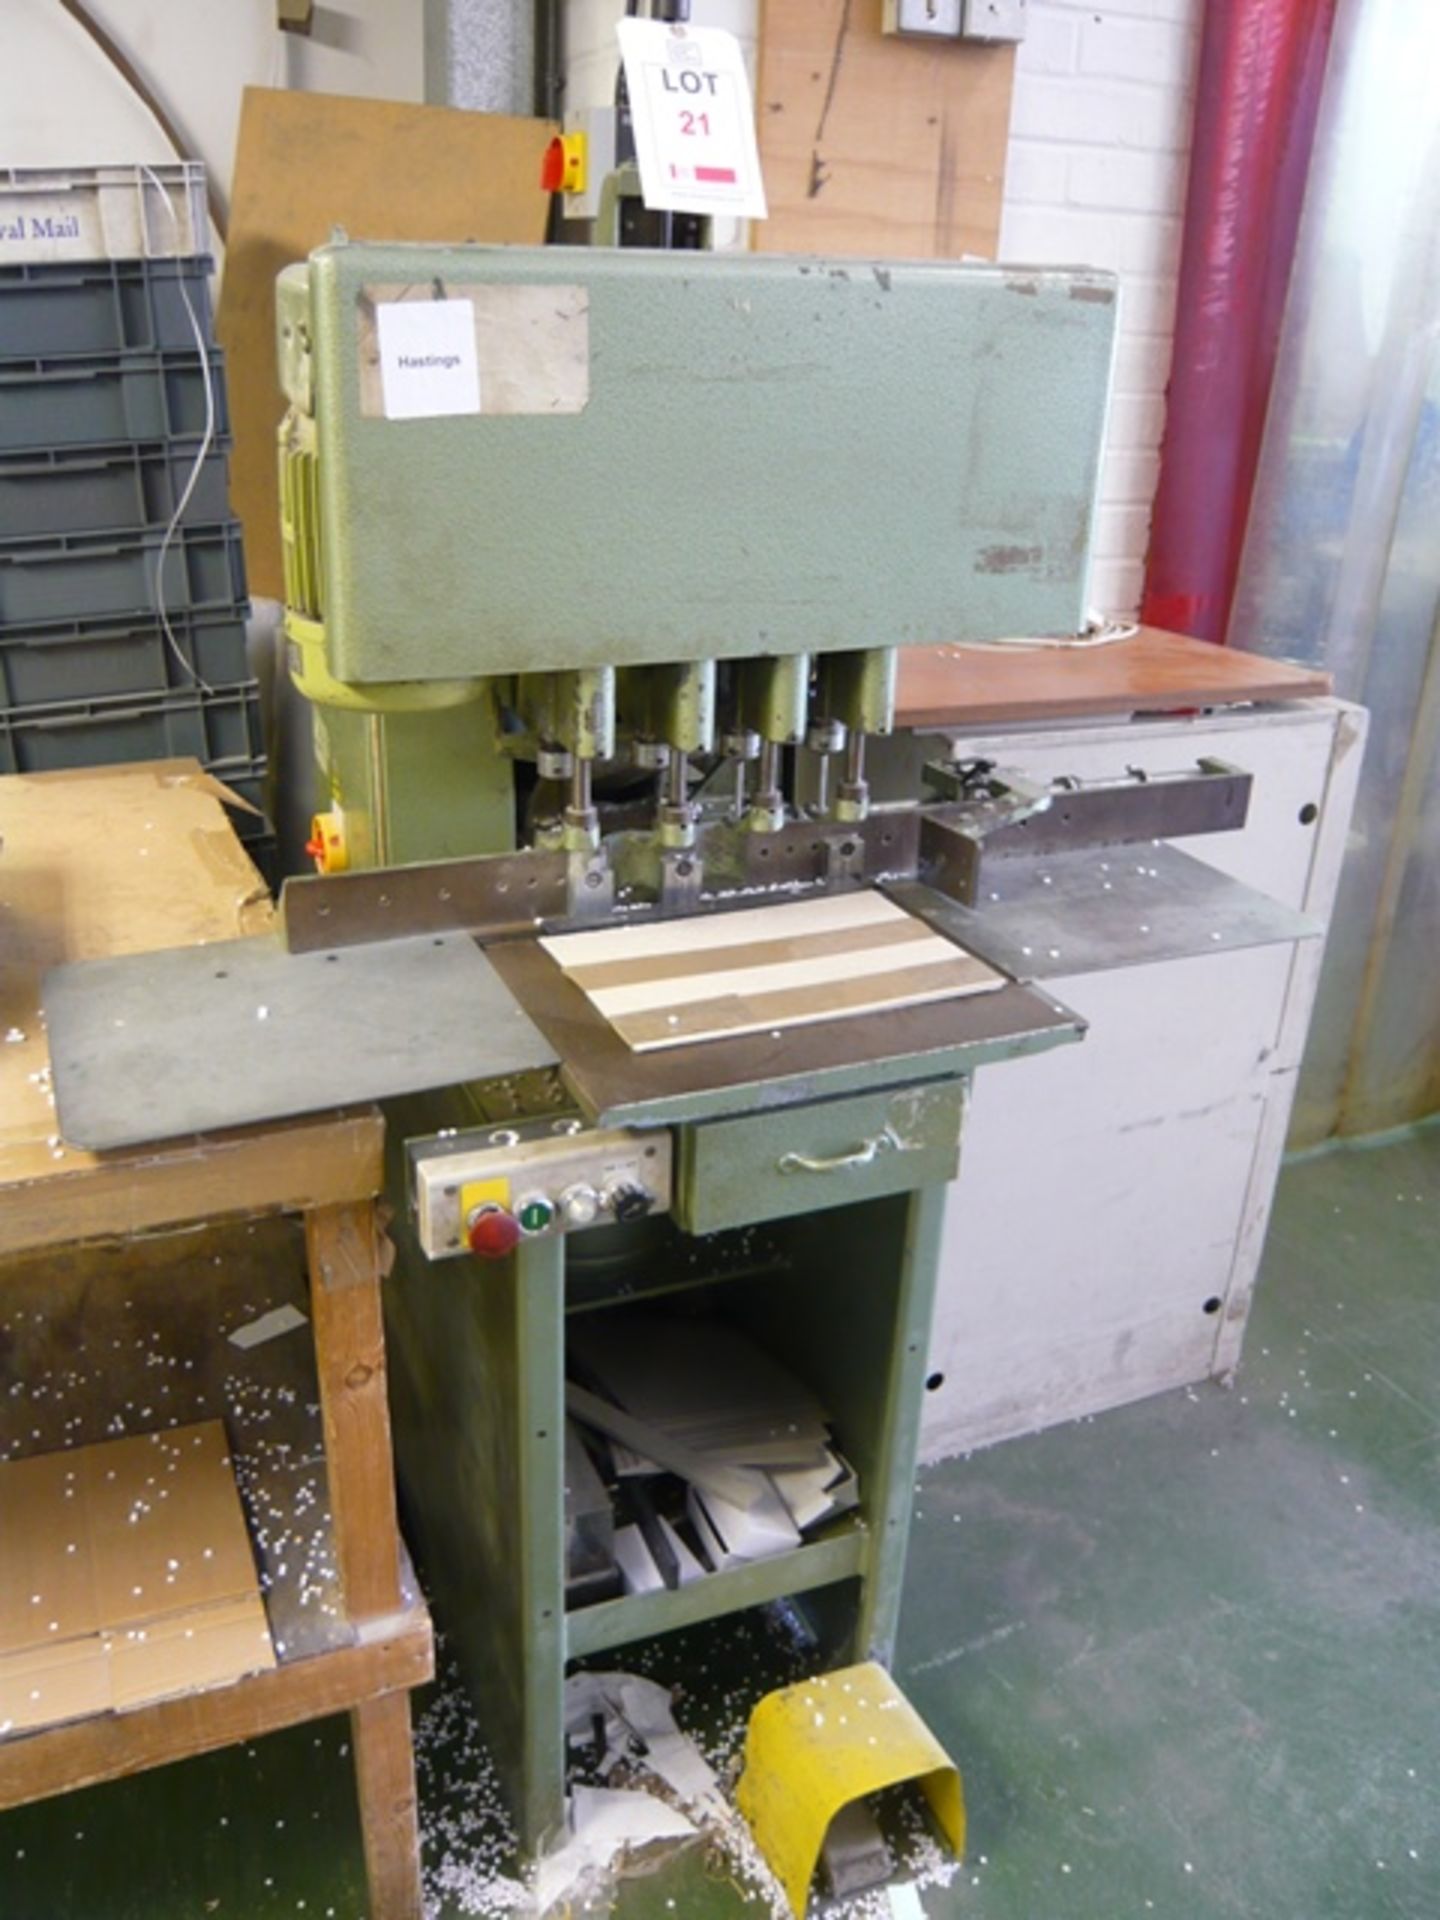 Stanley Press Equipment, 4 head paper drill press. NB: This item has no CE marking. The purchaser is